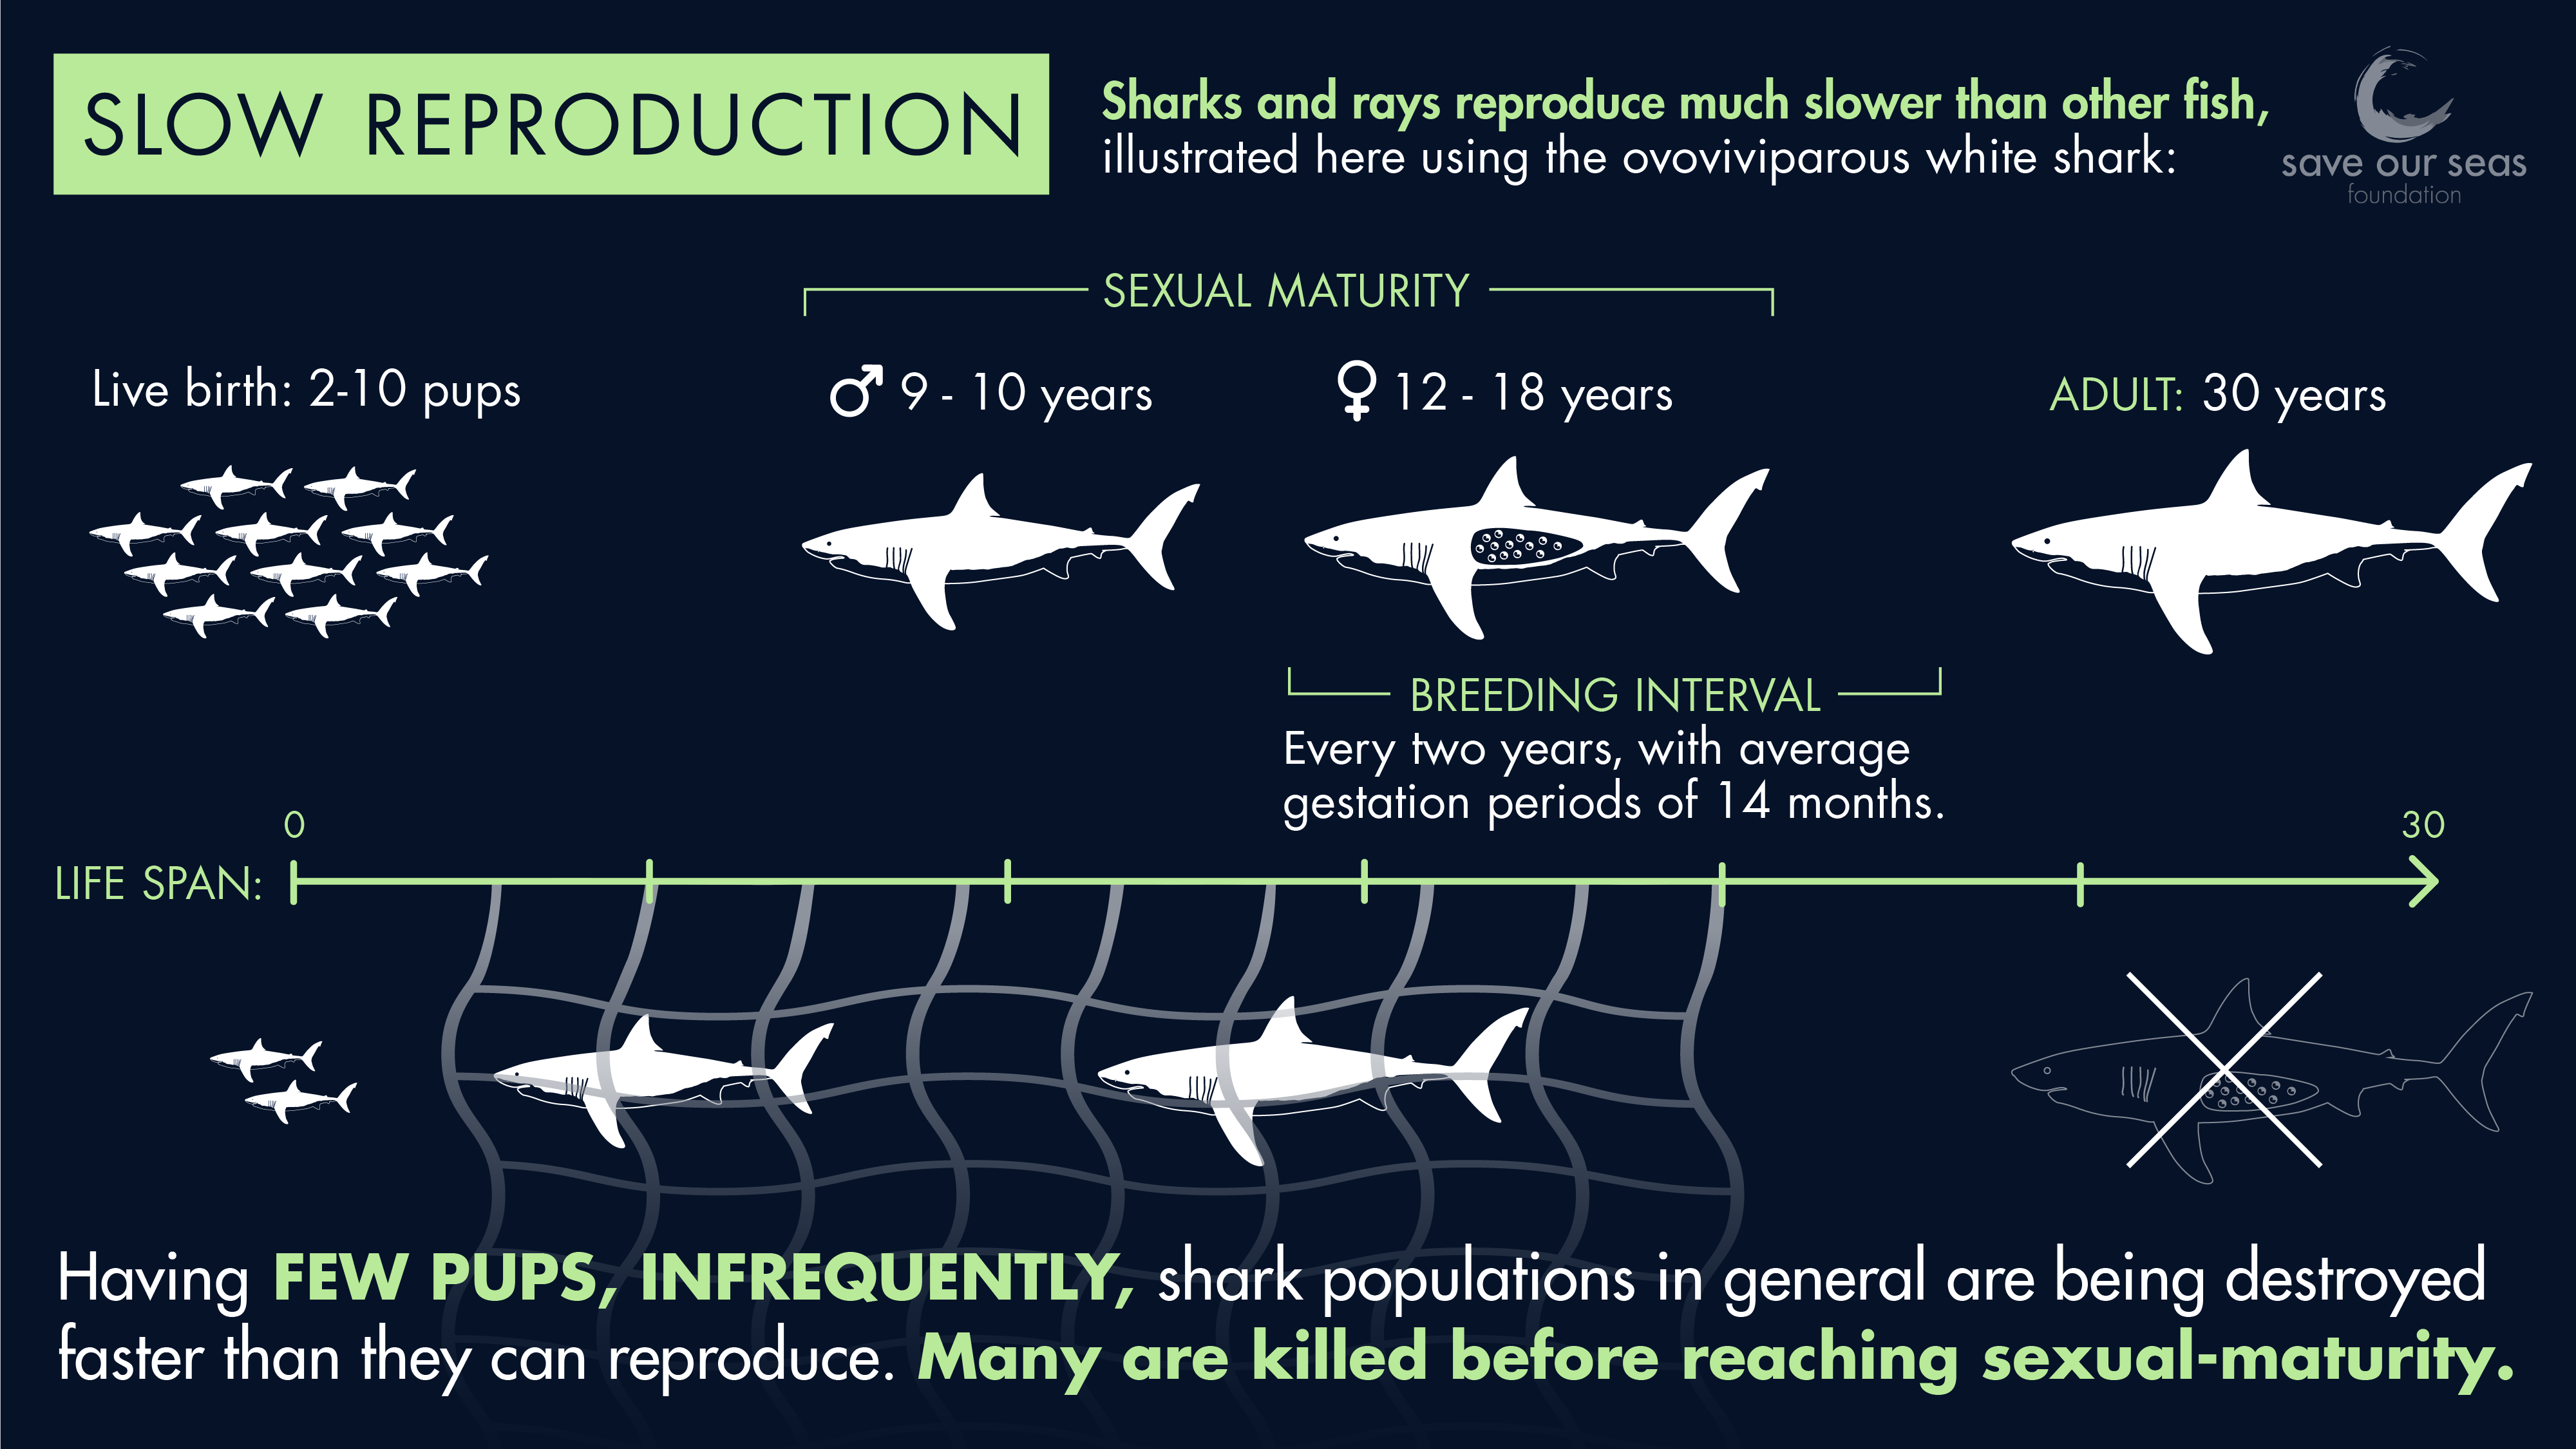 Do sharks reproduce quickly or slowly?